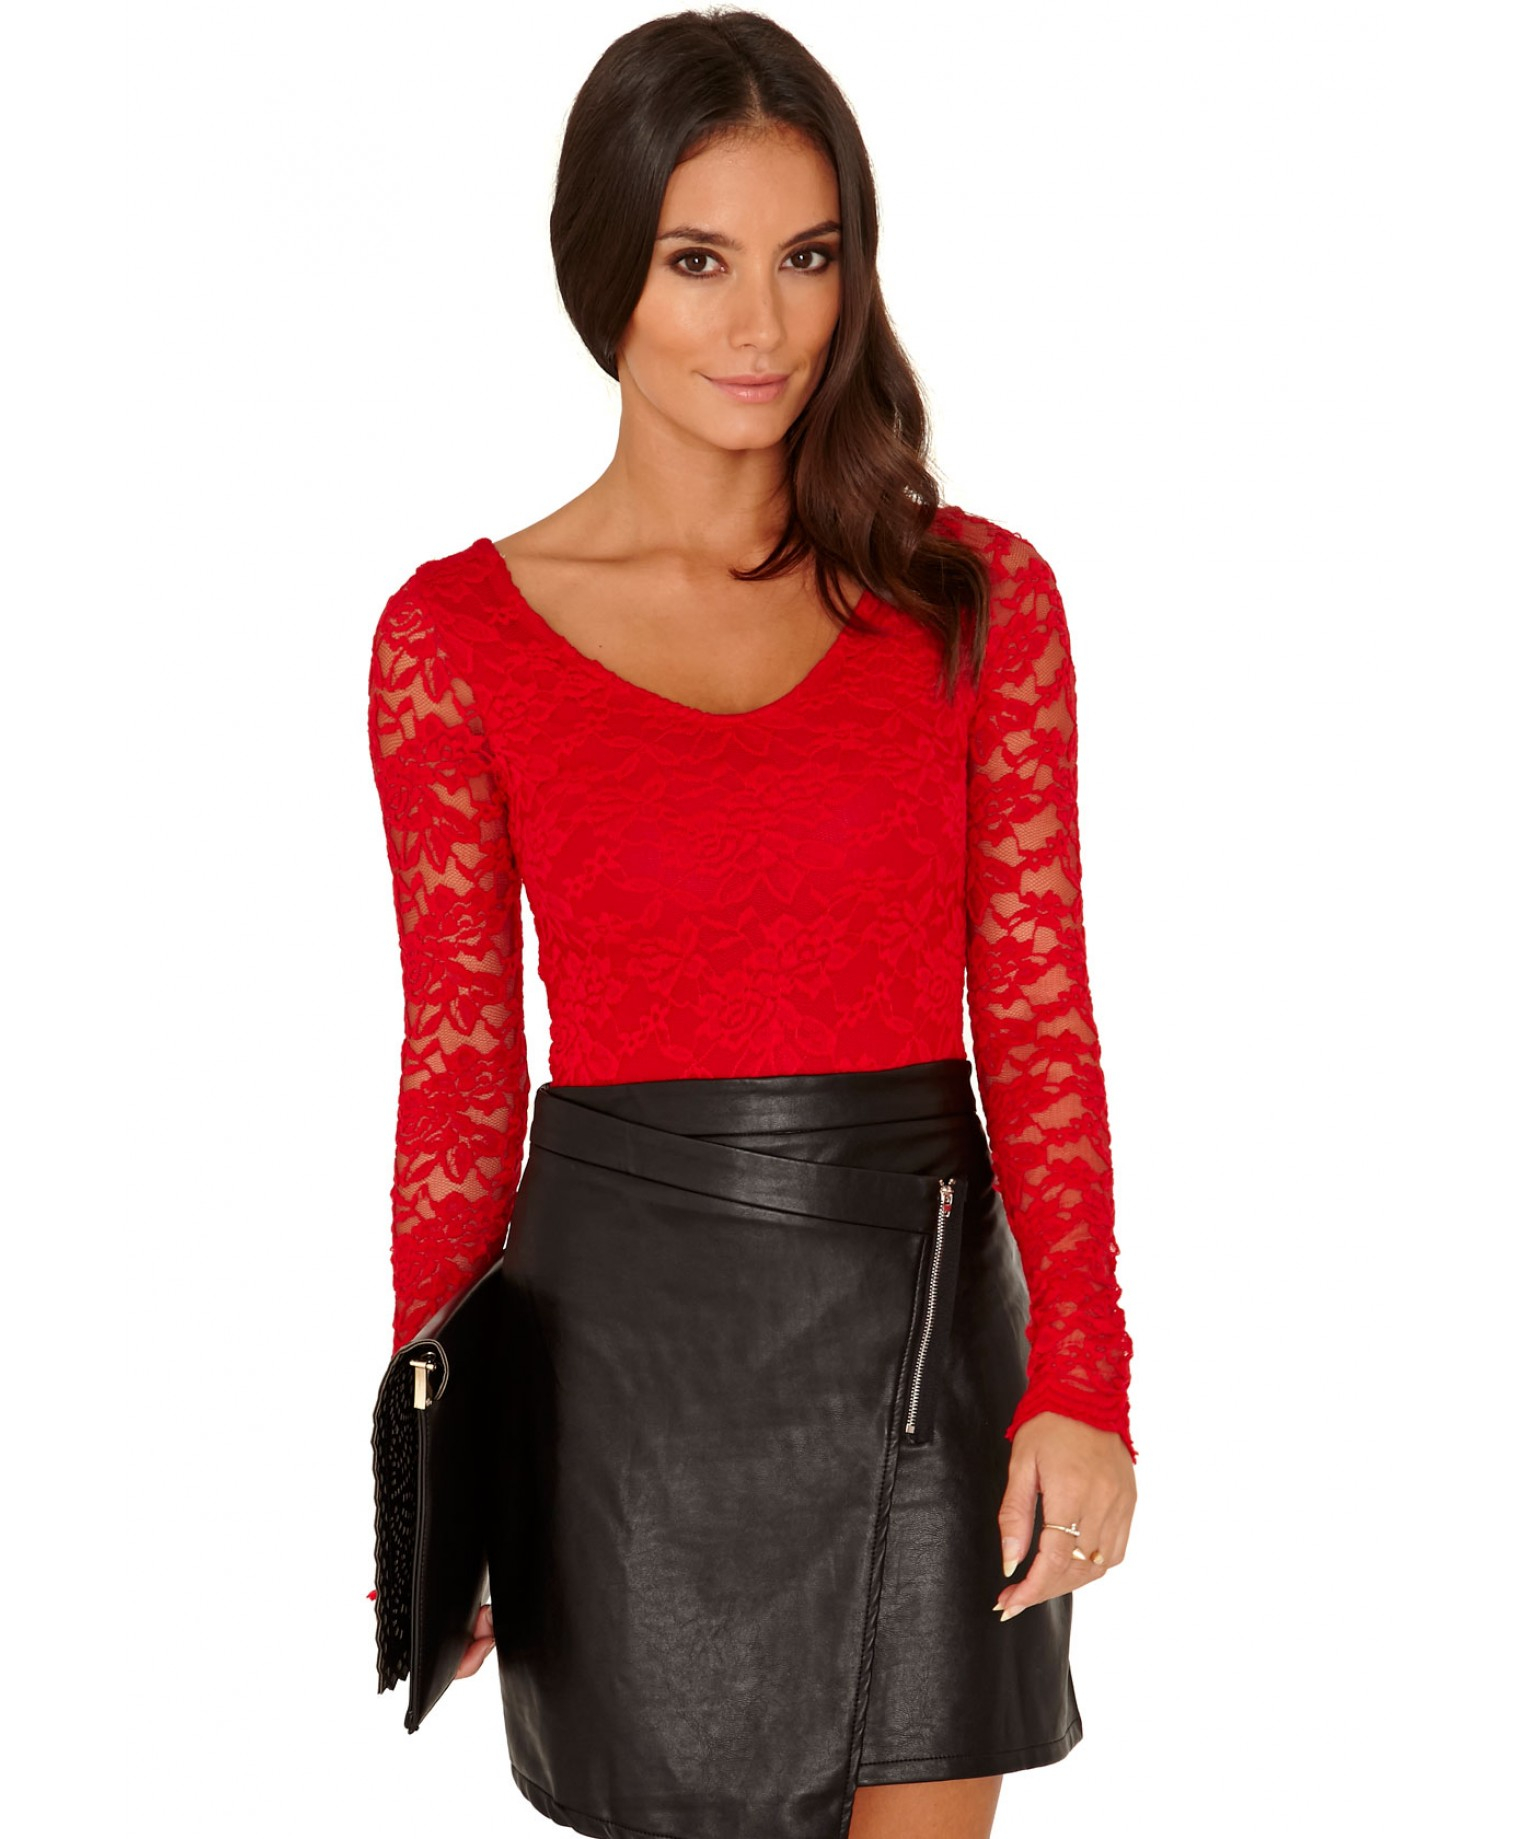 Missguided Arin Long Sleeve Lace Bodysuit in Red - Lyst